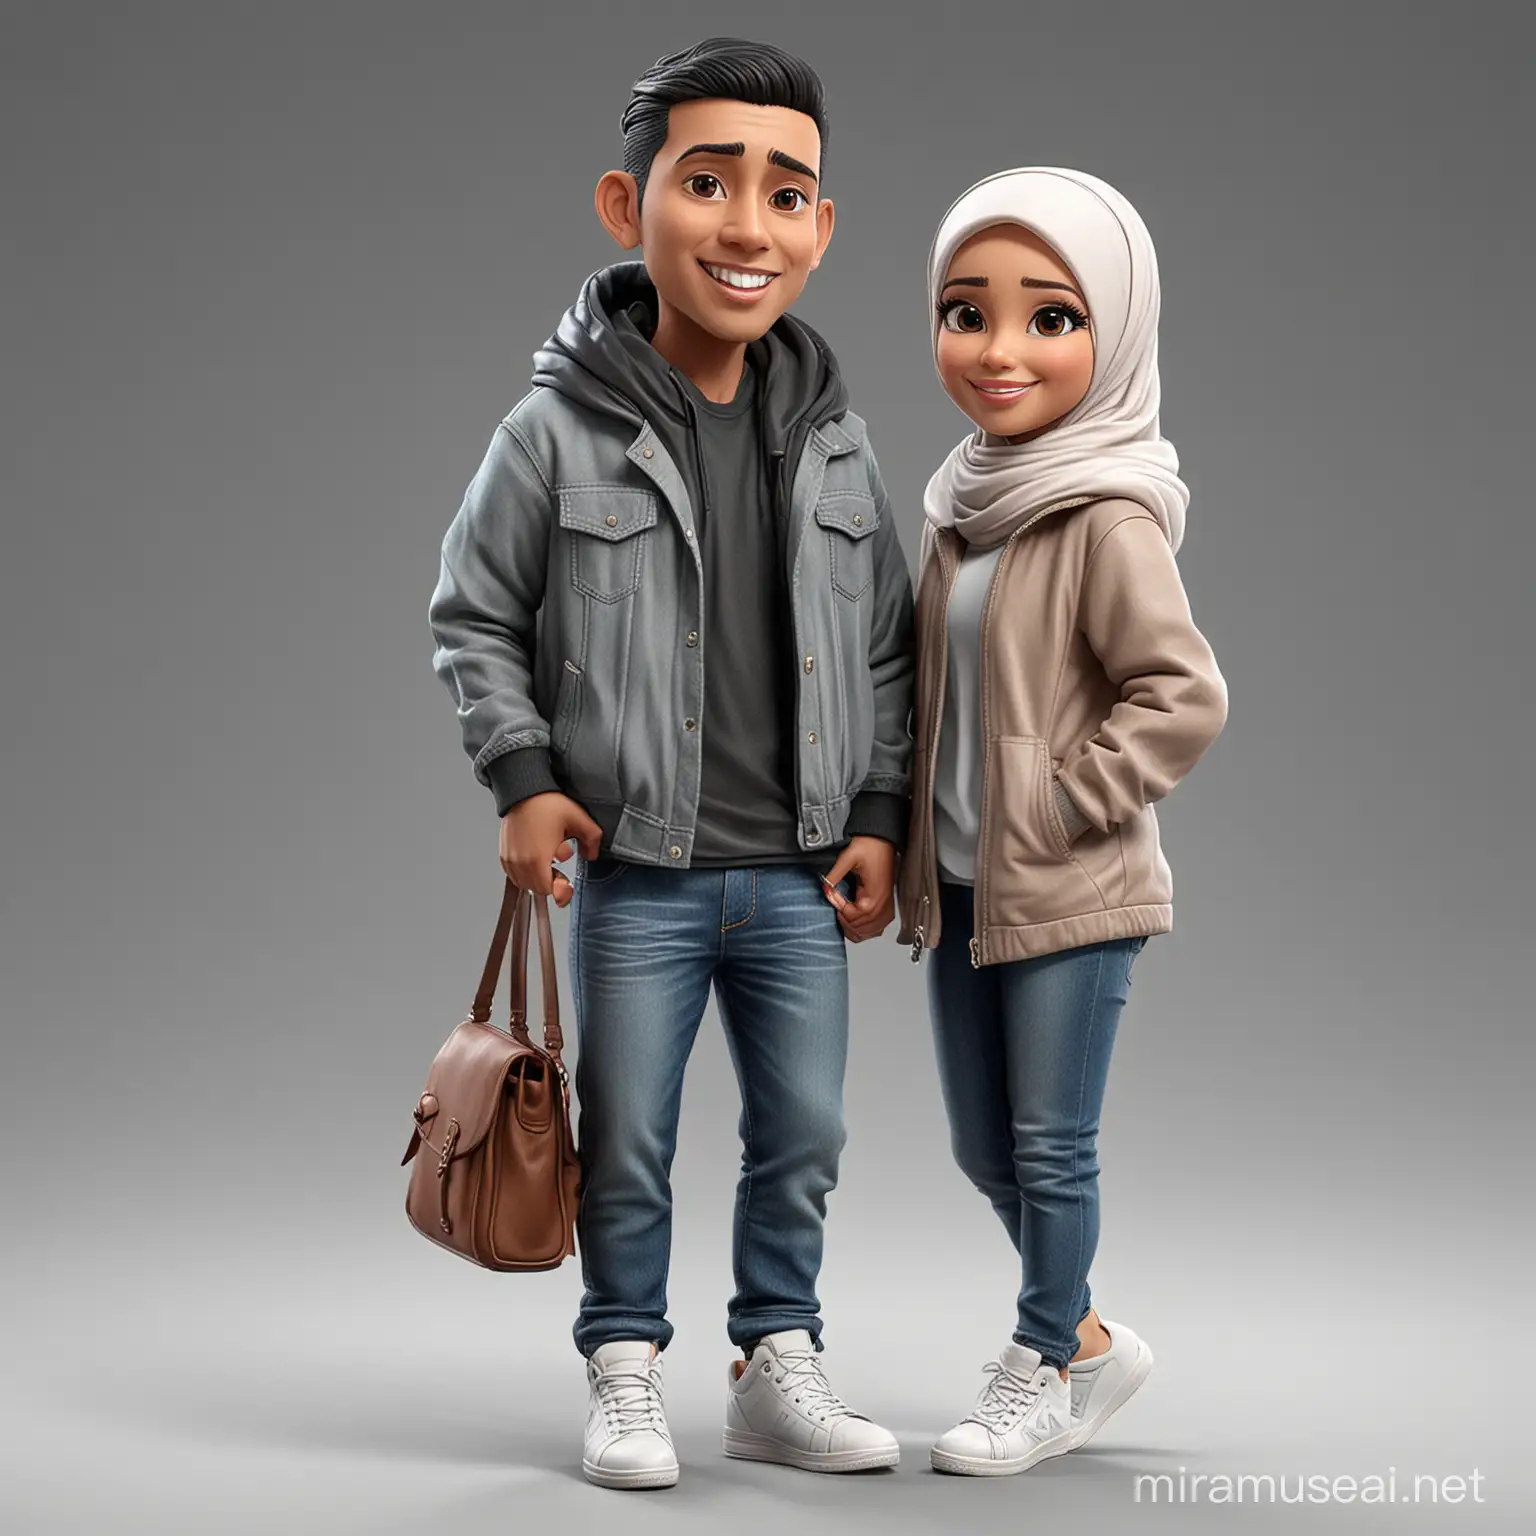 Photo realistic caricature 3d cartoon render, of a couple. one beautiful Indonesian Muslim girl, slightly chubby, Wear hijab with a parka jacket
and denim jeans complete with white sneakers and one Muslim man, wear denim jacket, and leather shoes.